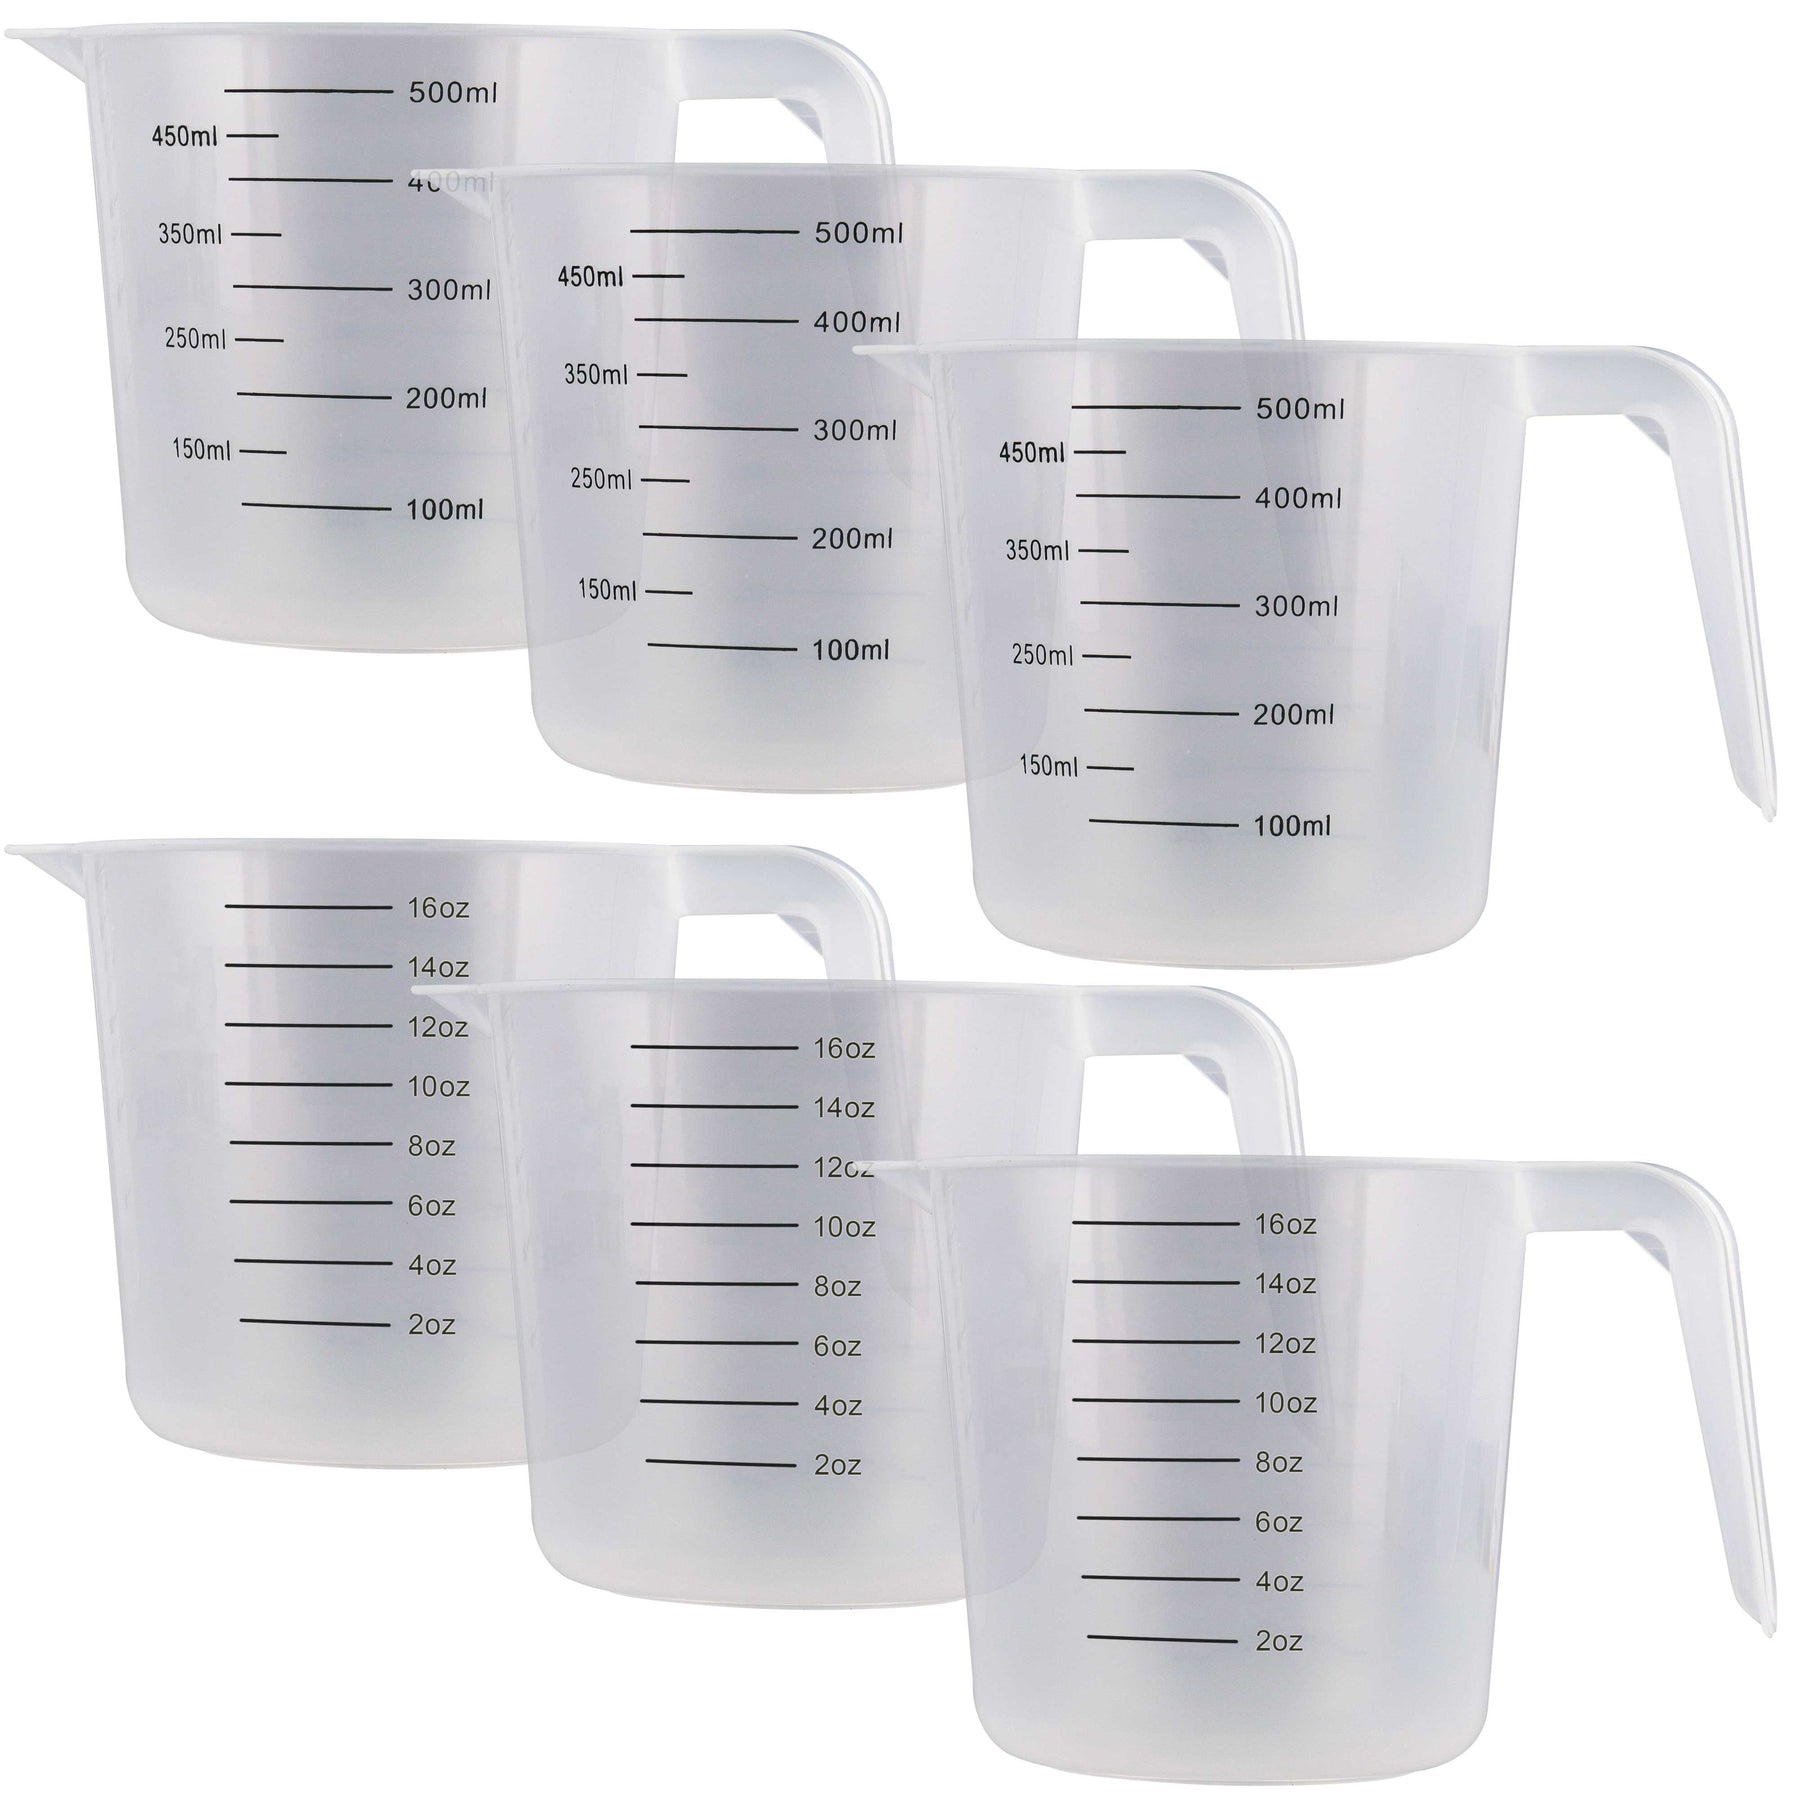 U.S. Kitchen Supply - 16 oz (500 ml) Plastic Graduated Measuring Cups with Pitcher Handles (Pack of 6), 2 Cup Capacity, Ounce ml Markings Measure Mix